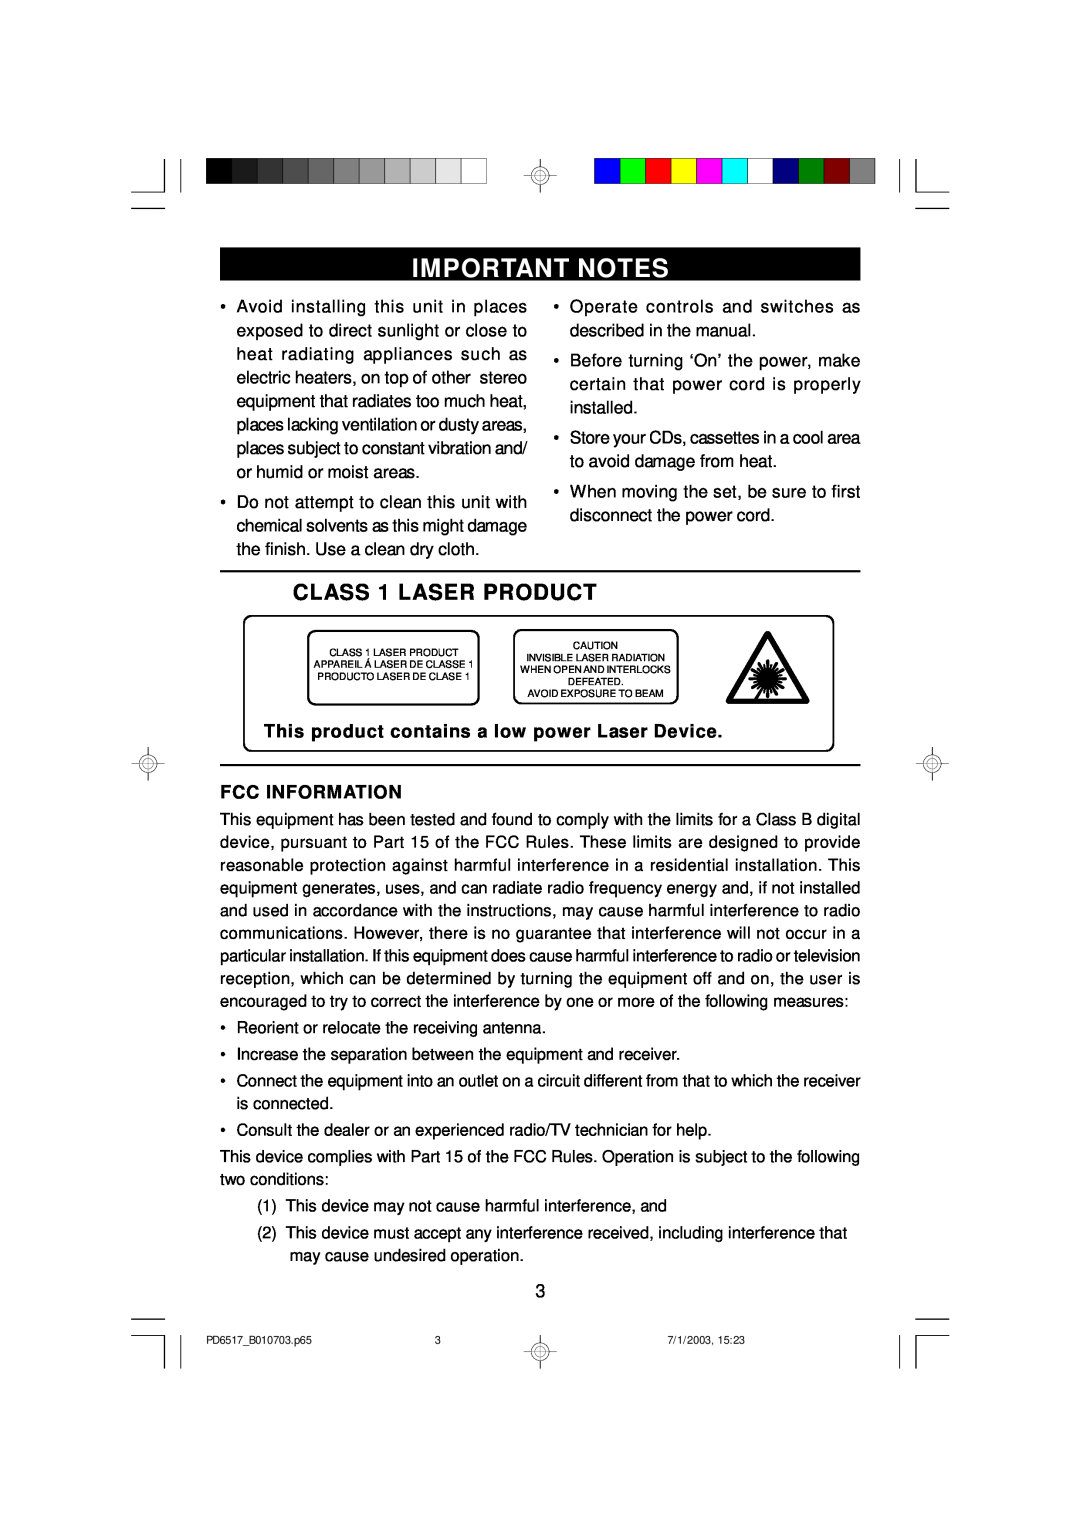 Emerson PD6517 Important Notes, CLASS 1 LASER PRODUCT, This product contains a low power Laser Device FCC INFORMATION 